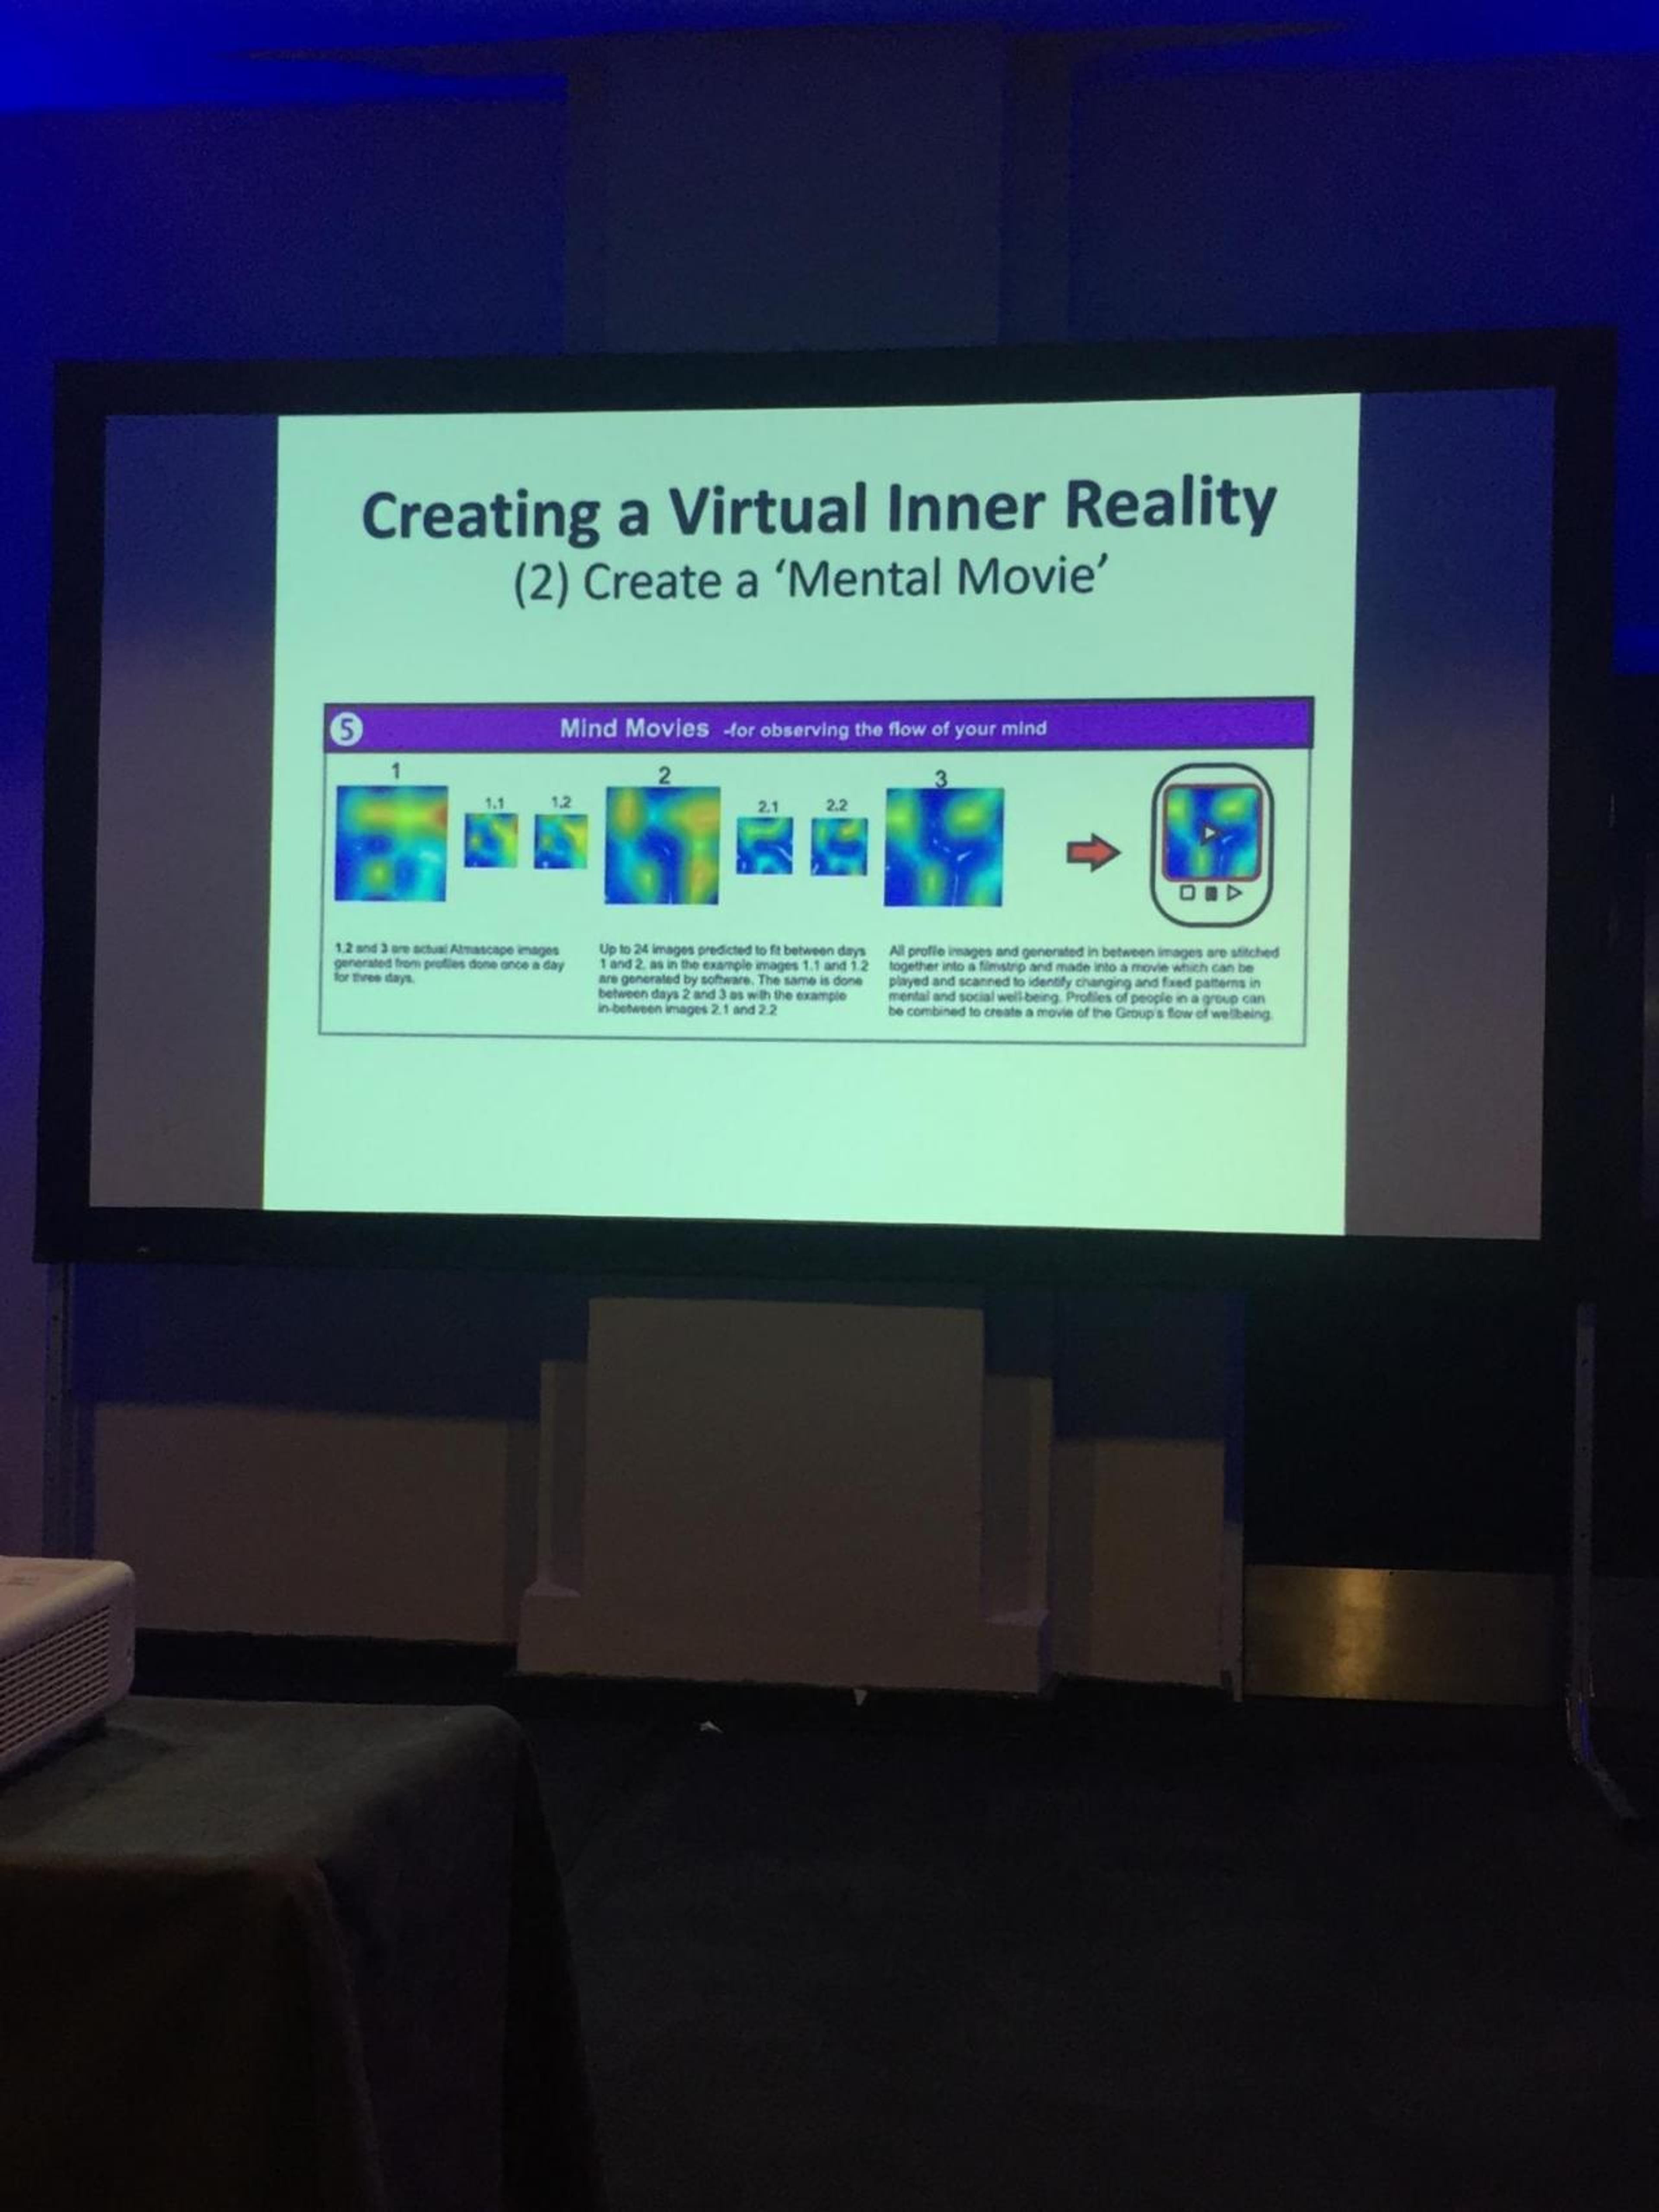 "Creating a Virtual Inner Reality"